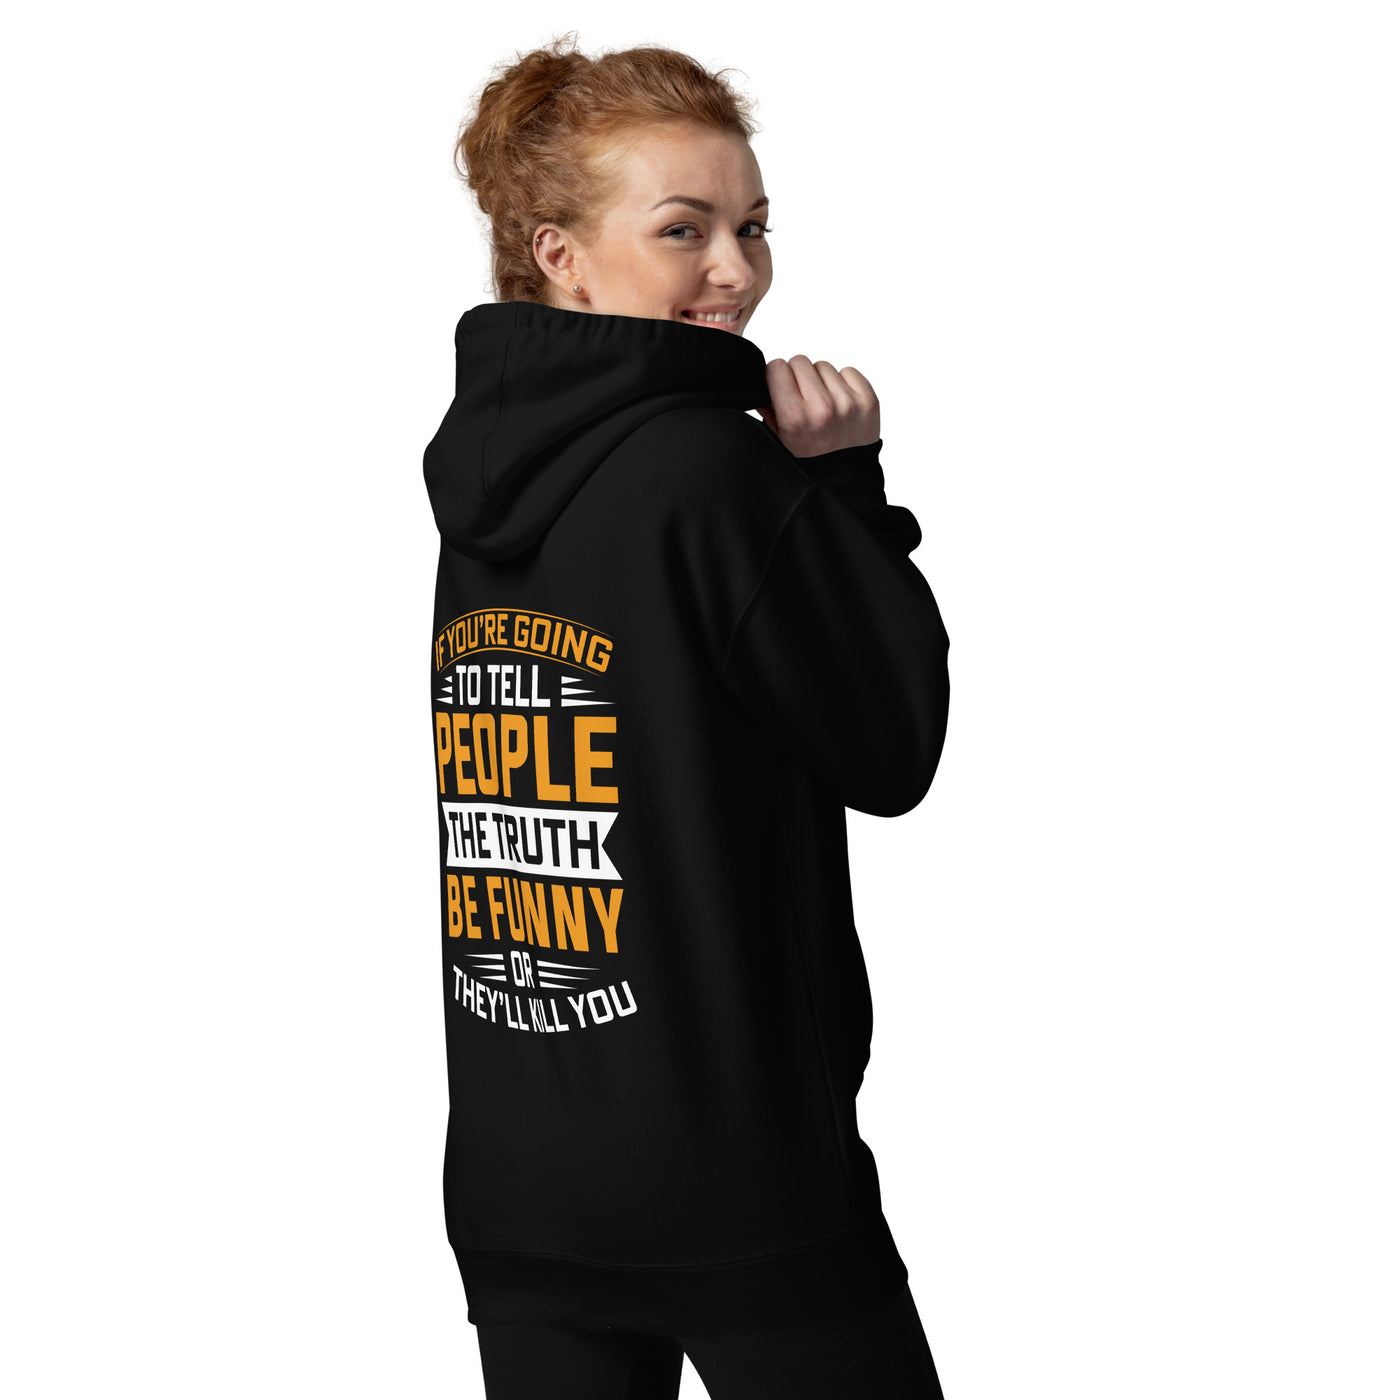 If you are going to tell the people the truth; be funny or they'll kill you - Unisex Hoodie ( Back Print )